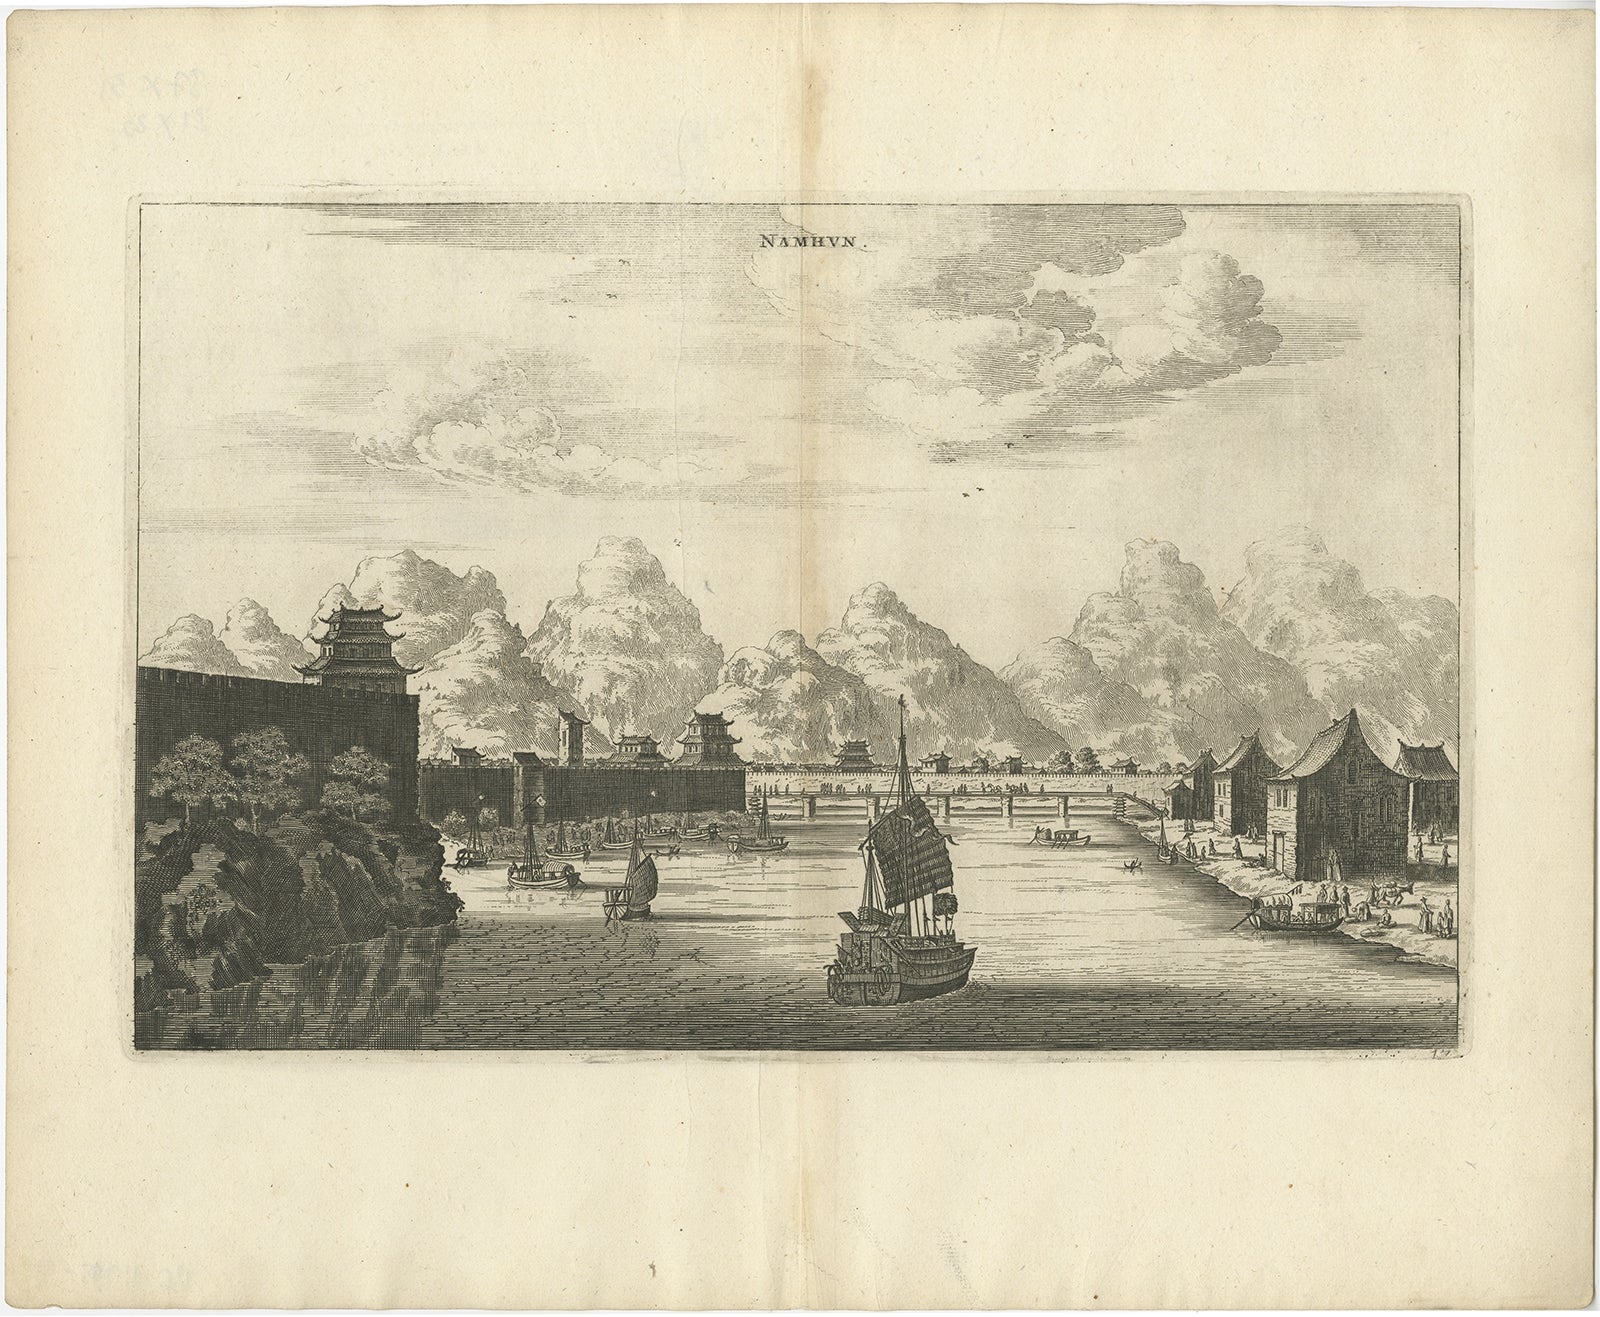 Antique Print of the City of Namhun in China by Nieuhof, 1668